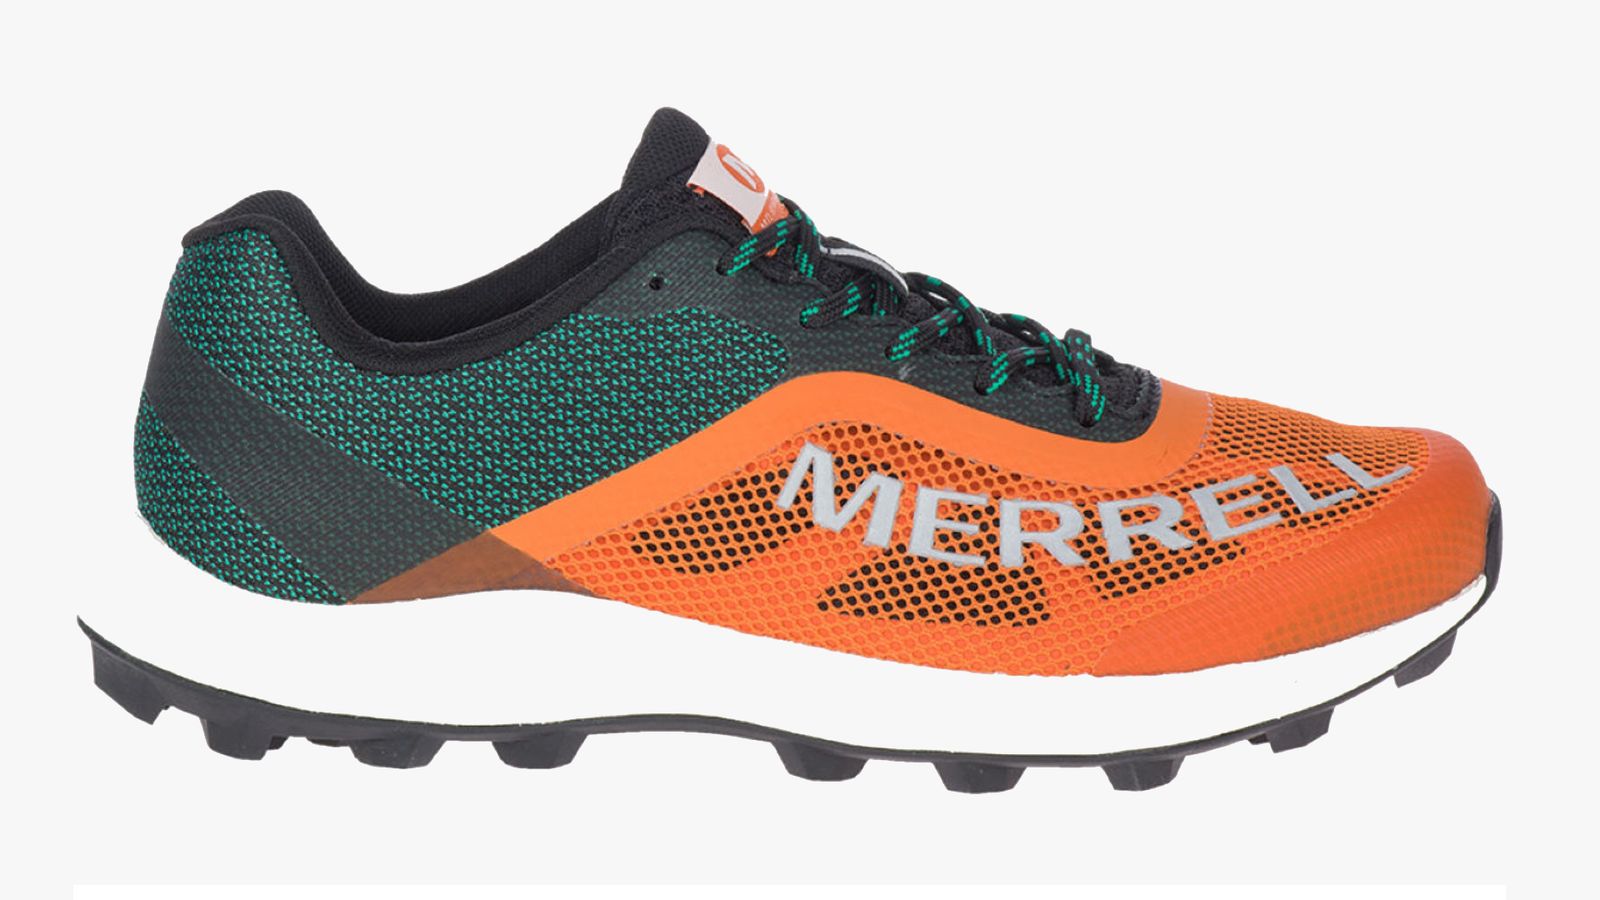 Merrell MTL Skyfire product image of a bright orange and green shoe.